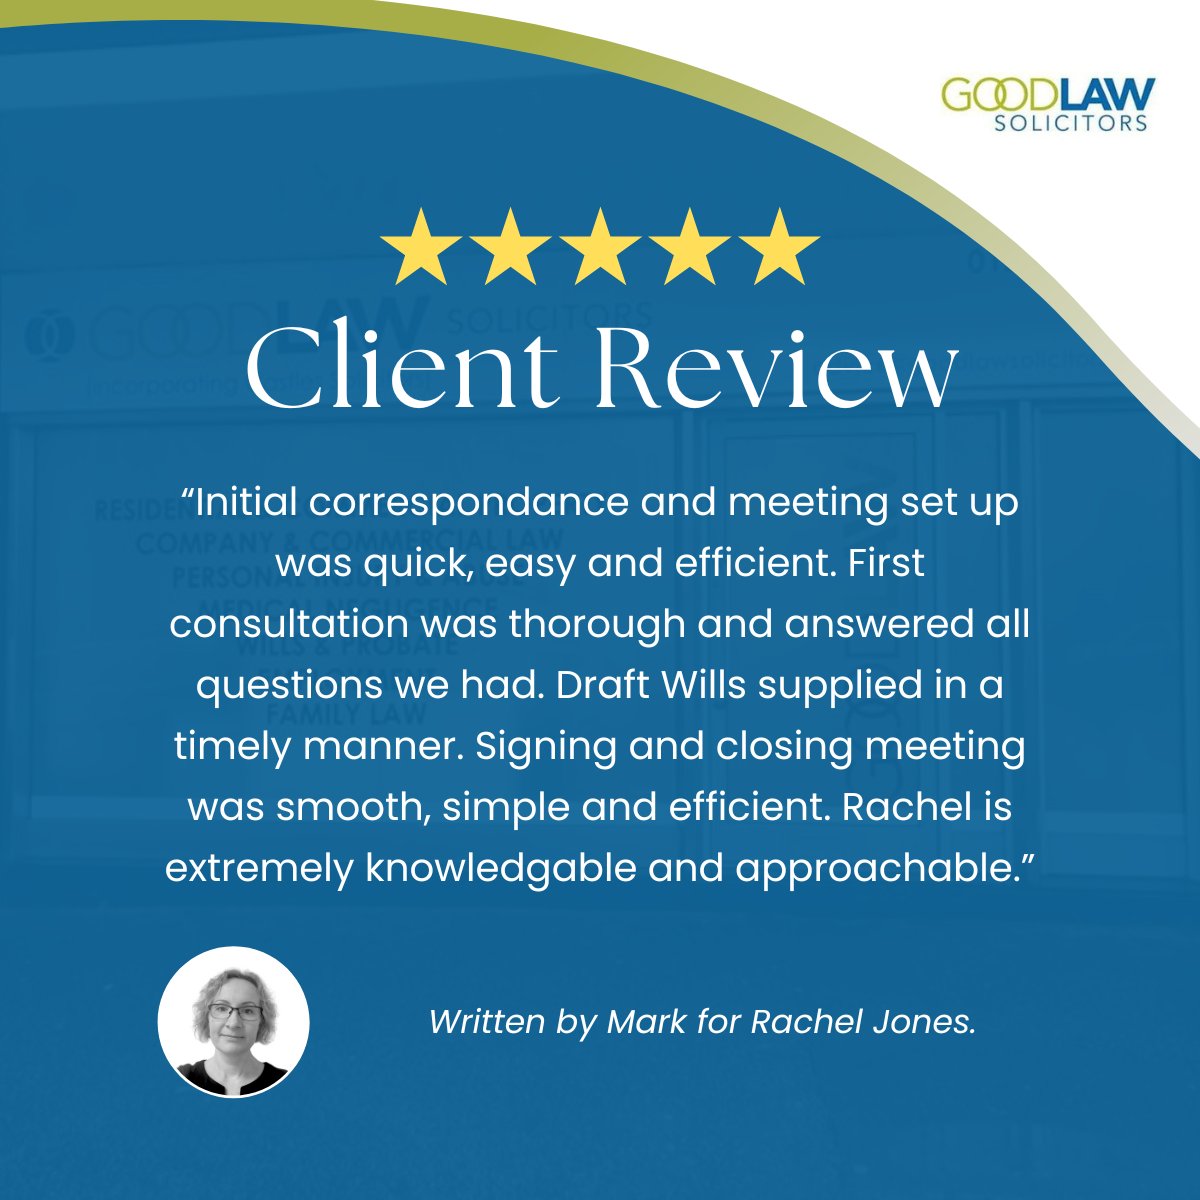 Rachel Jones receives a 5-Star Review!👏

Rachel, who is situated in our GoodLaw Hassocks office, has been practicing law for 15 years. She specialises in wills, powers of attorney, probate, elder client care, and court of protection cases.

Contact Rachel on 01273 836004.